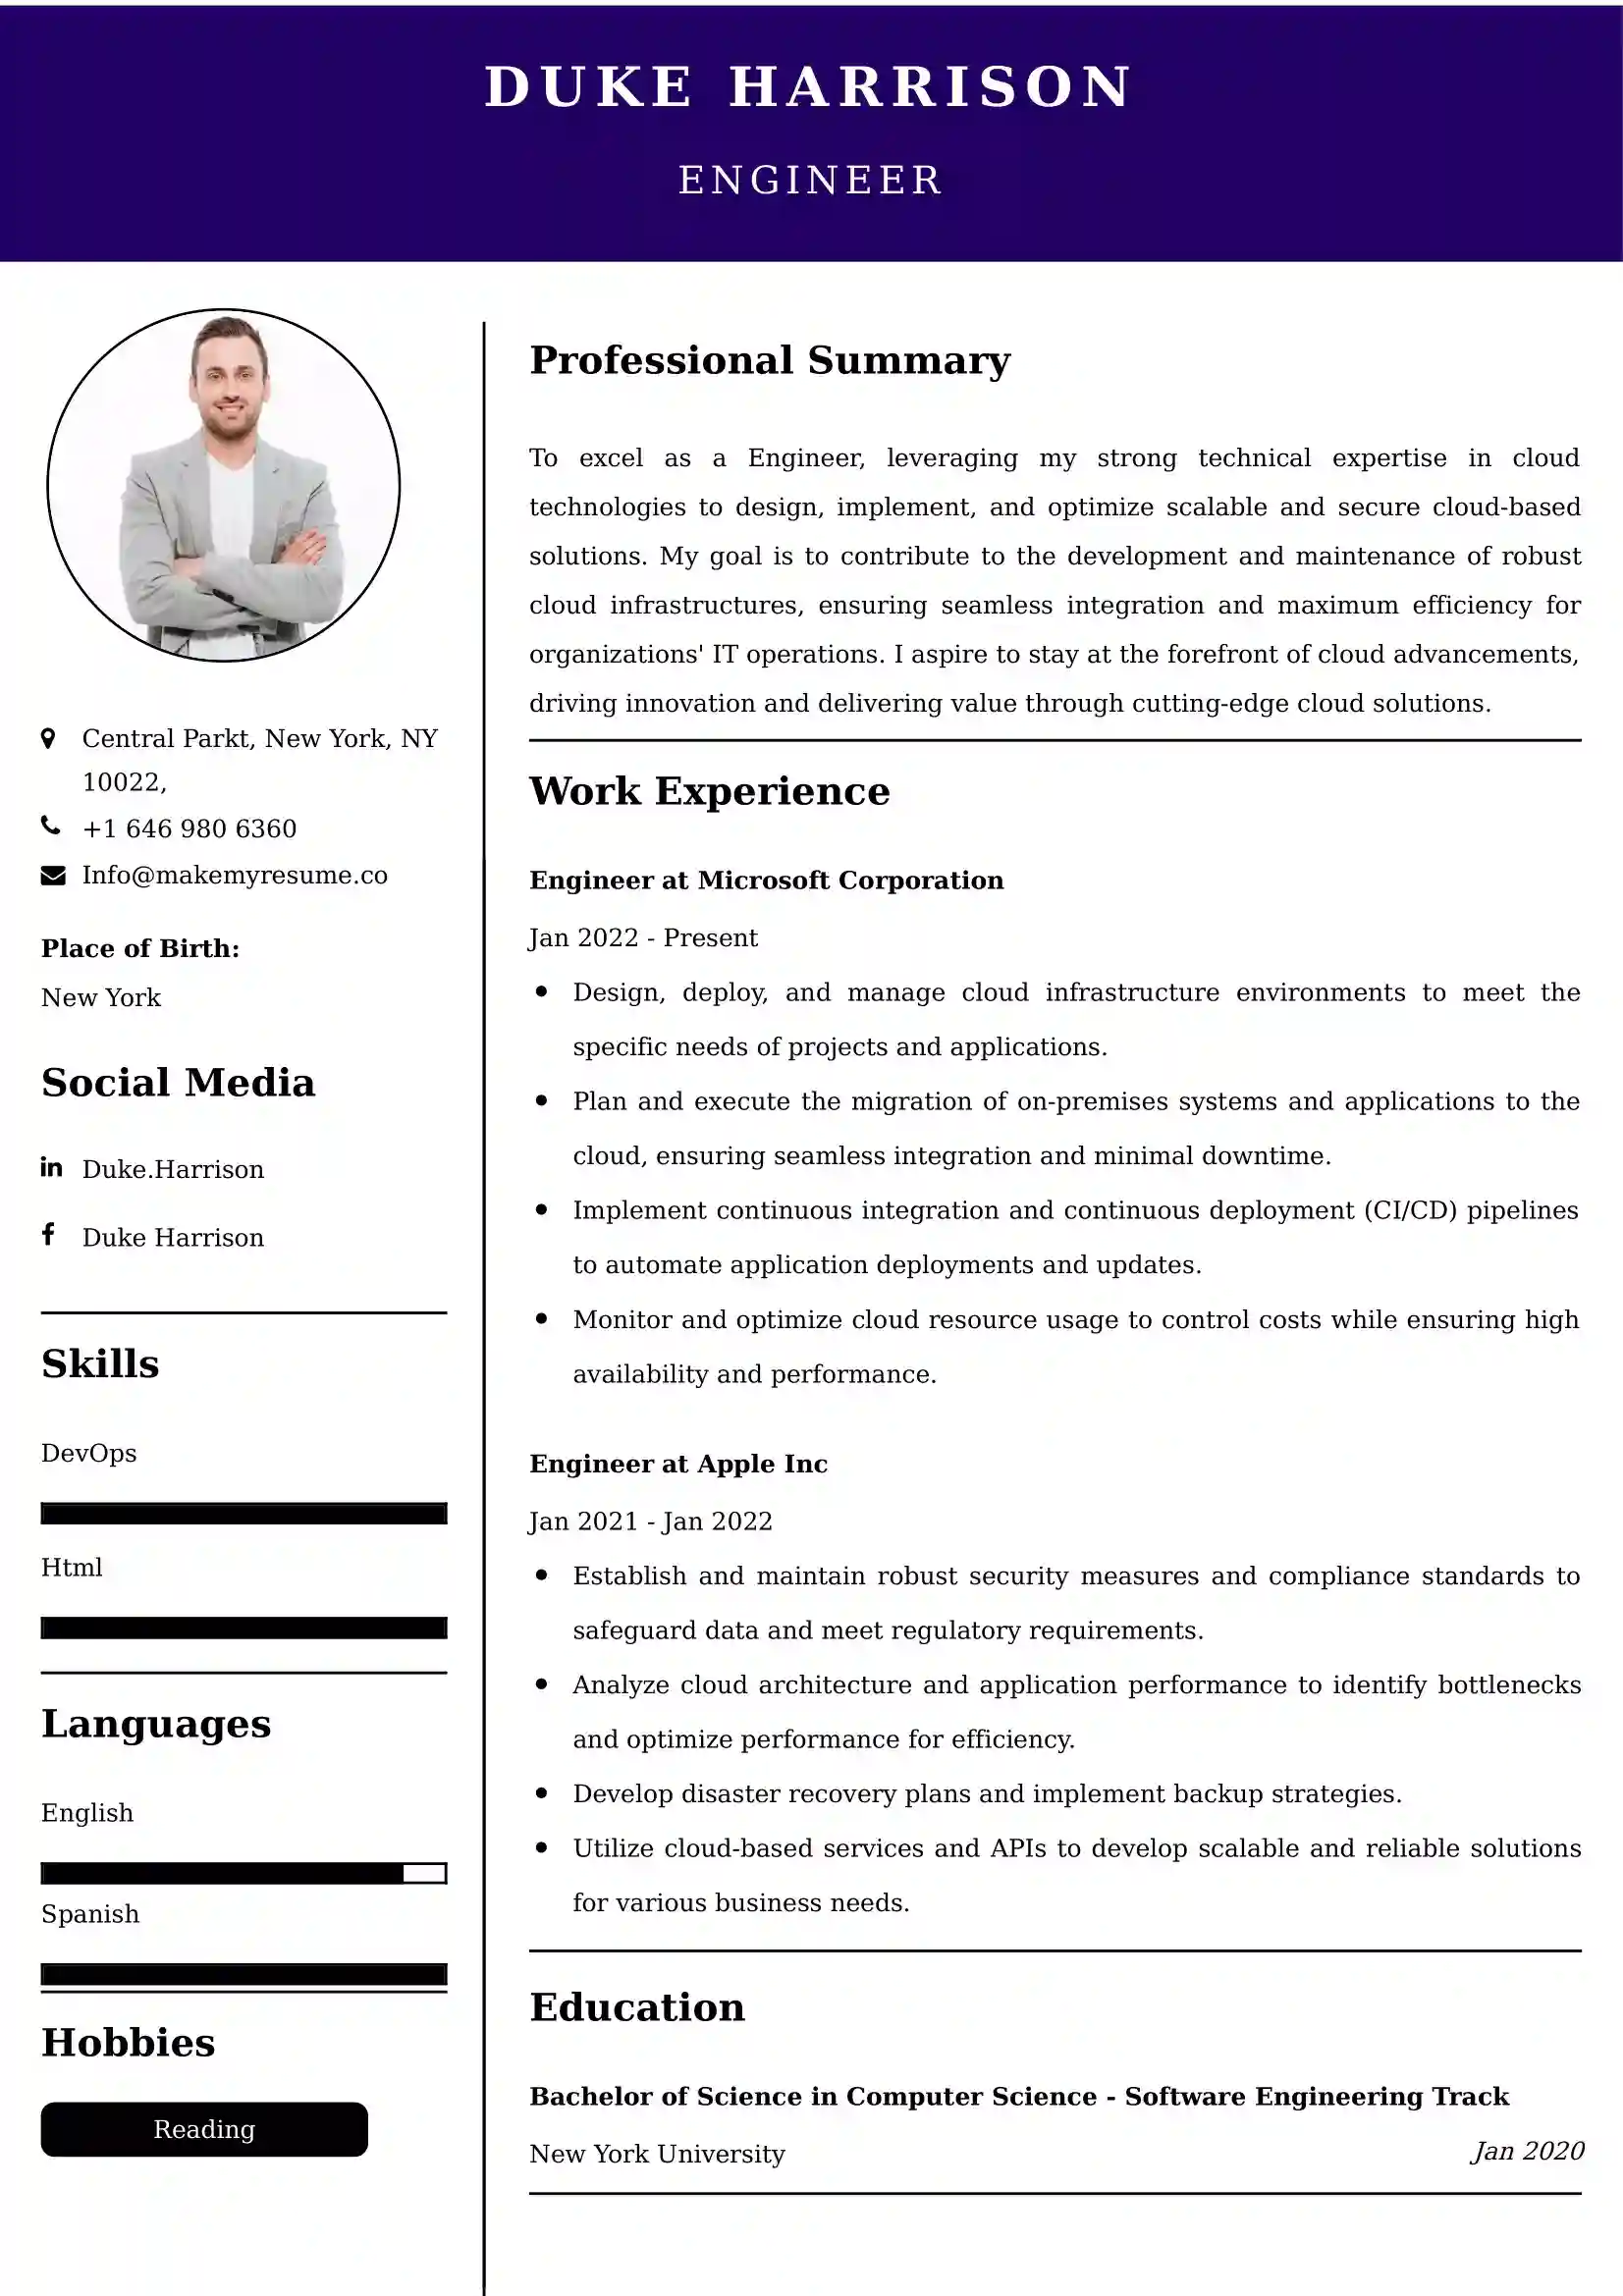 Engineer Resume Examples - UK Format, Latest Template.